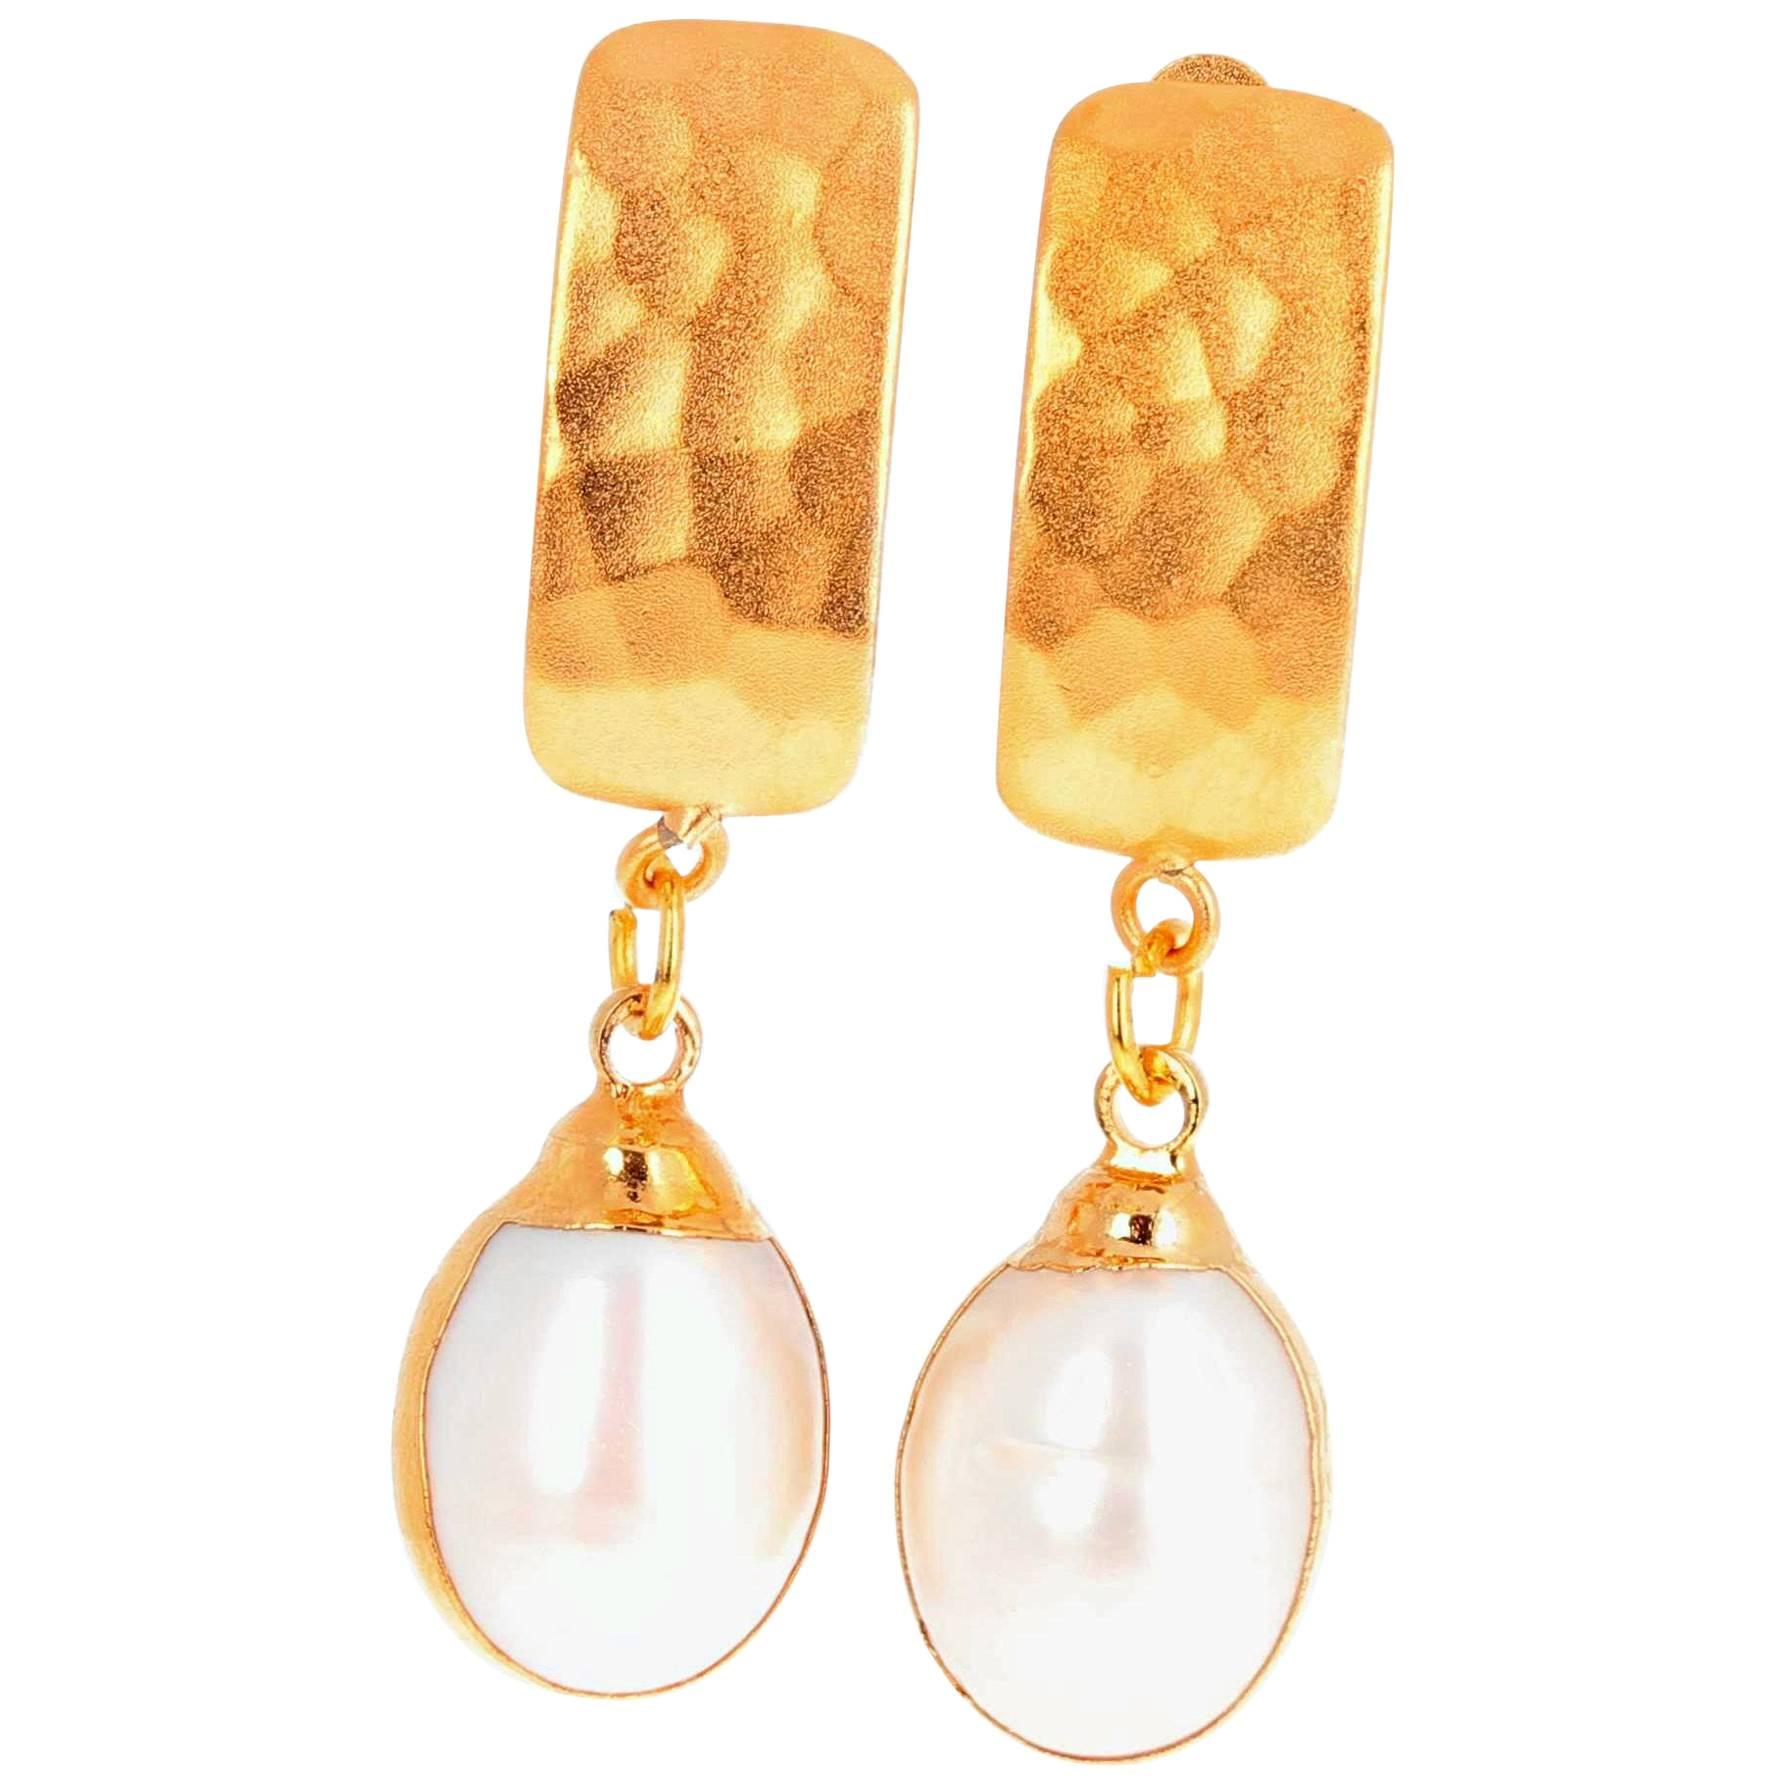 Unique Handmade Clip-on Gold Plated (Vermeil) Pearl Earrings